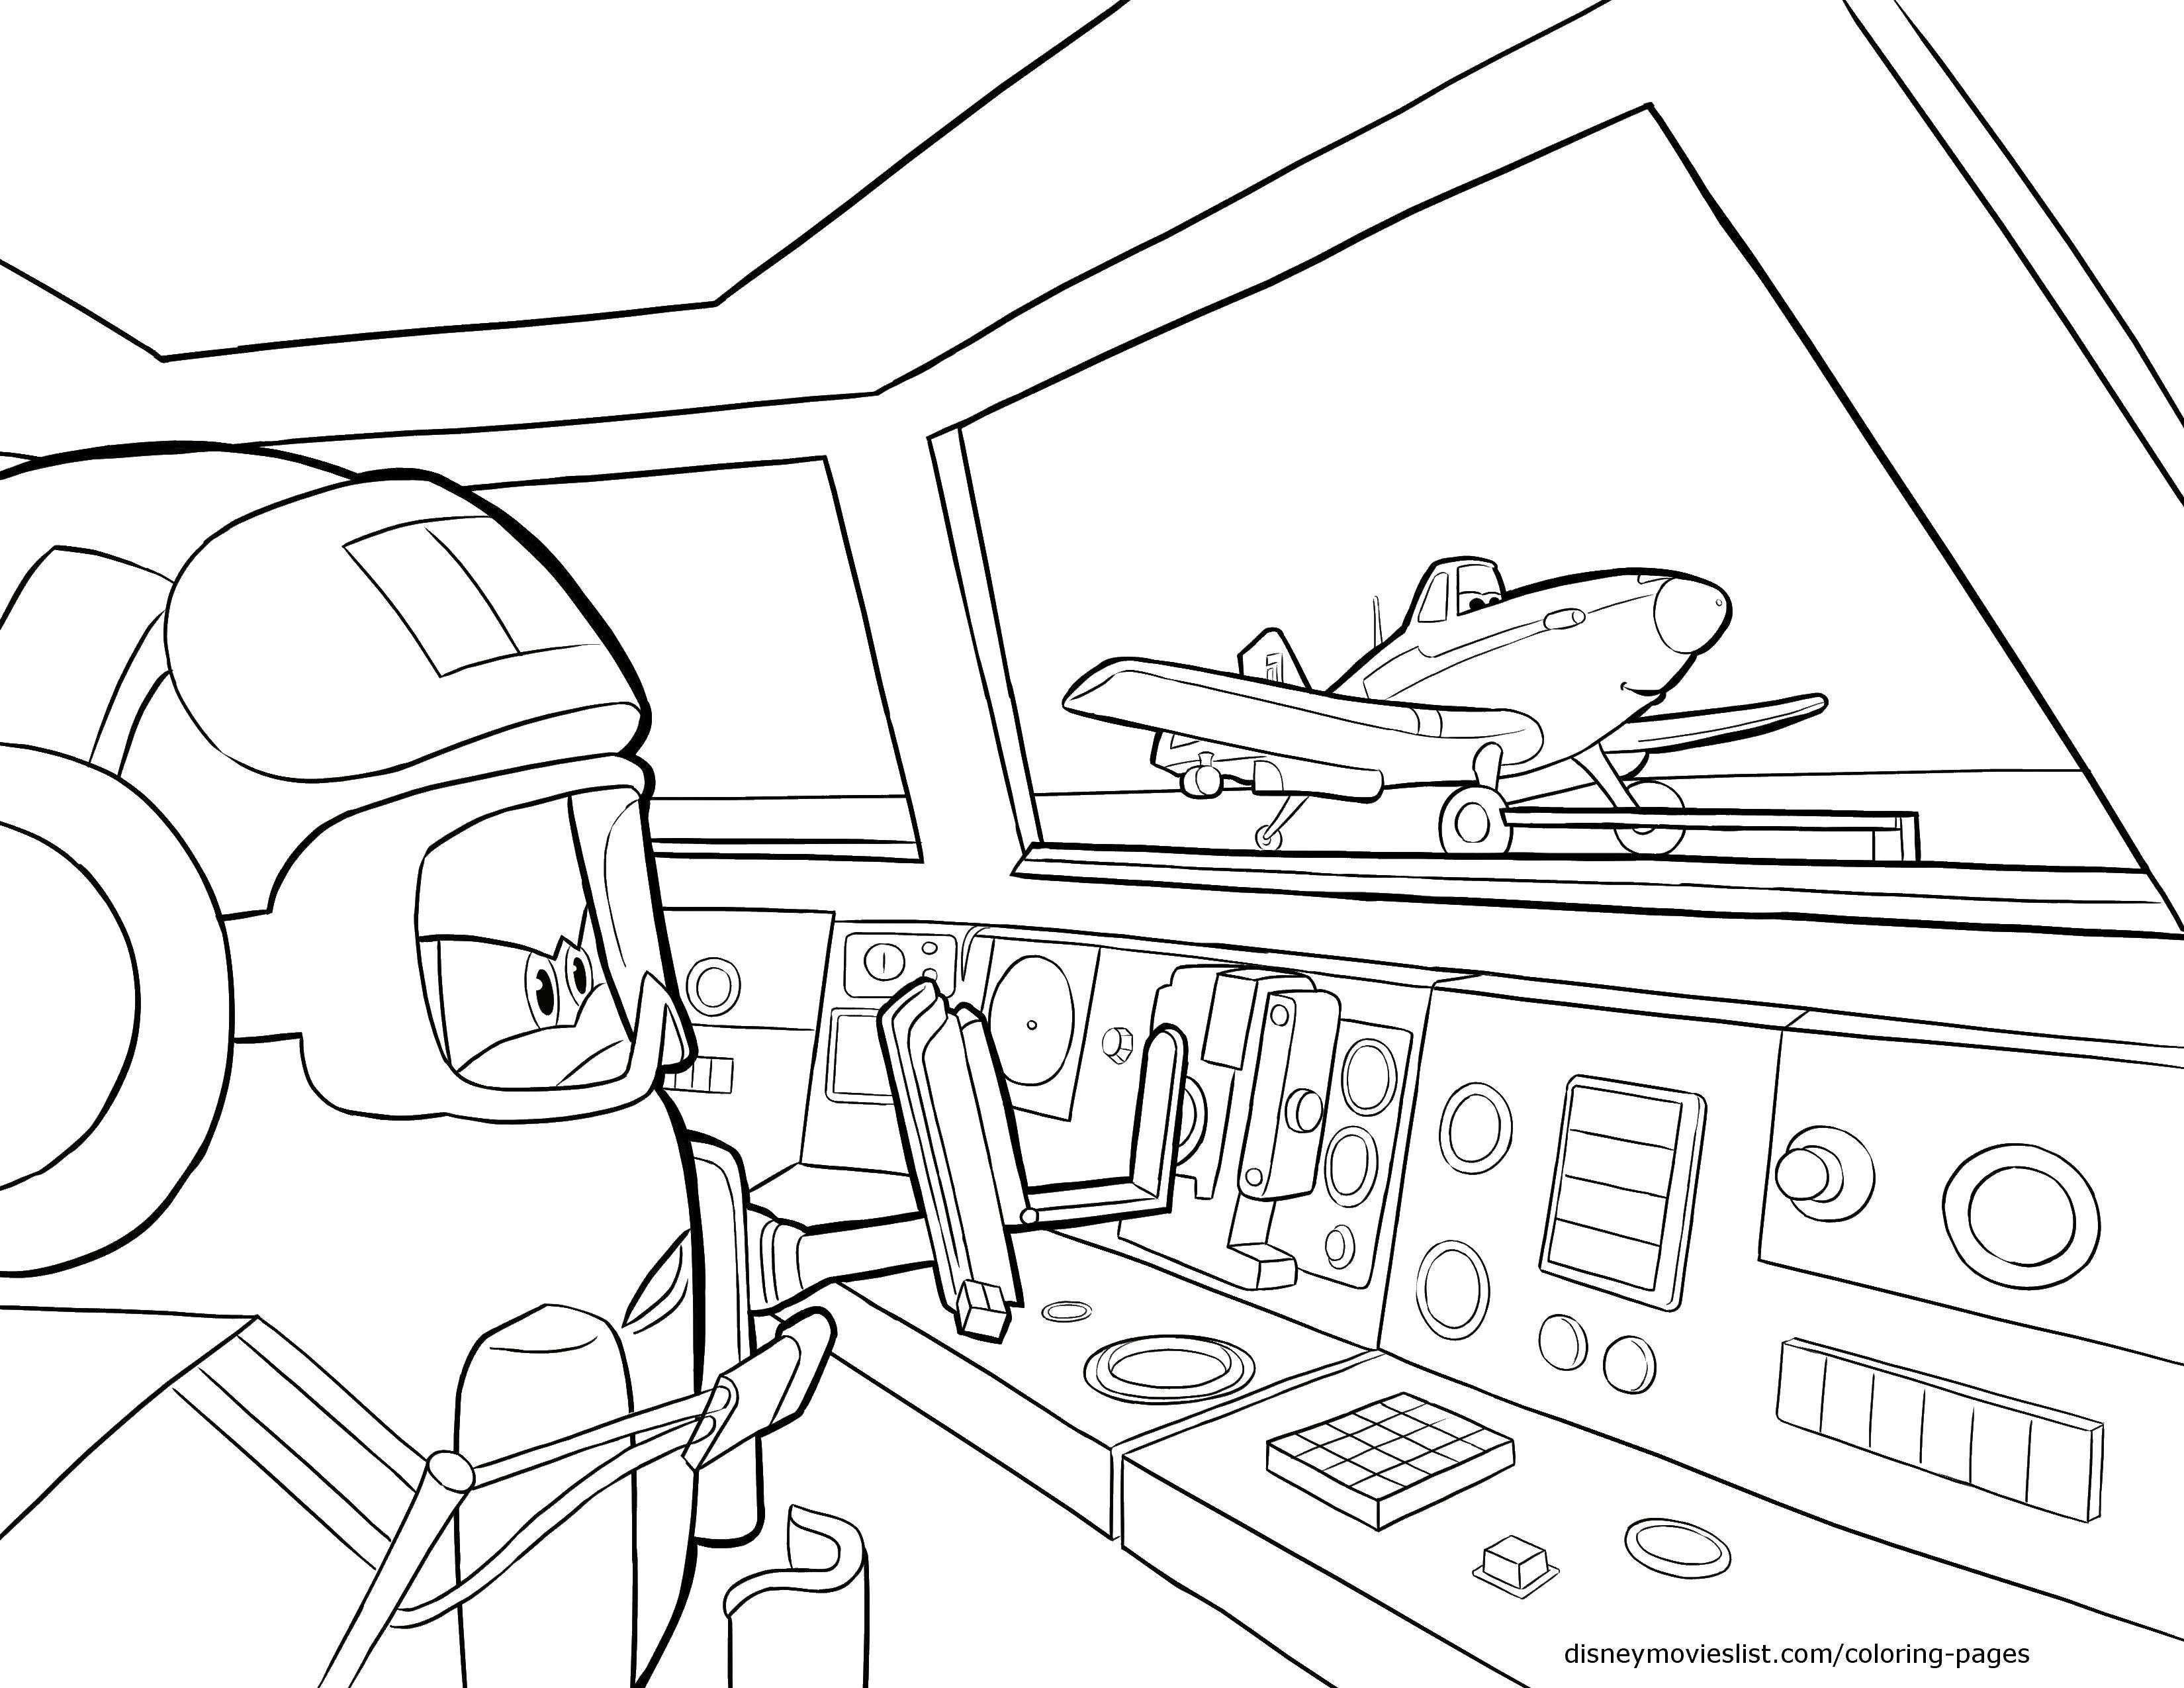 Coloring The control cabin of the aircraft. Category The planes. Tags:  Plane.